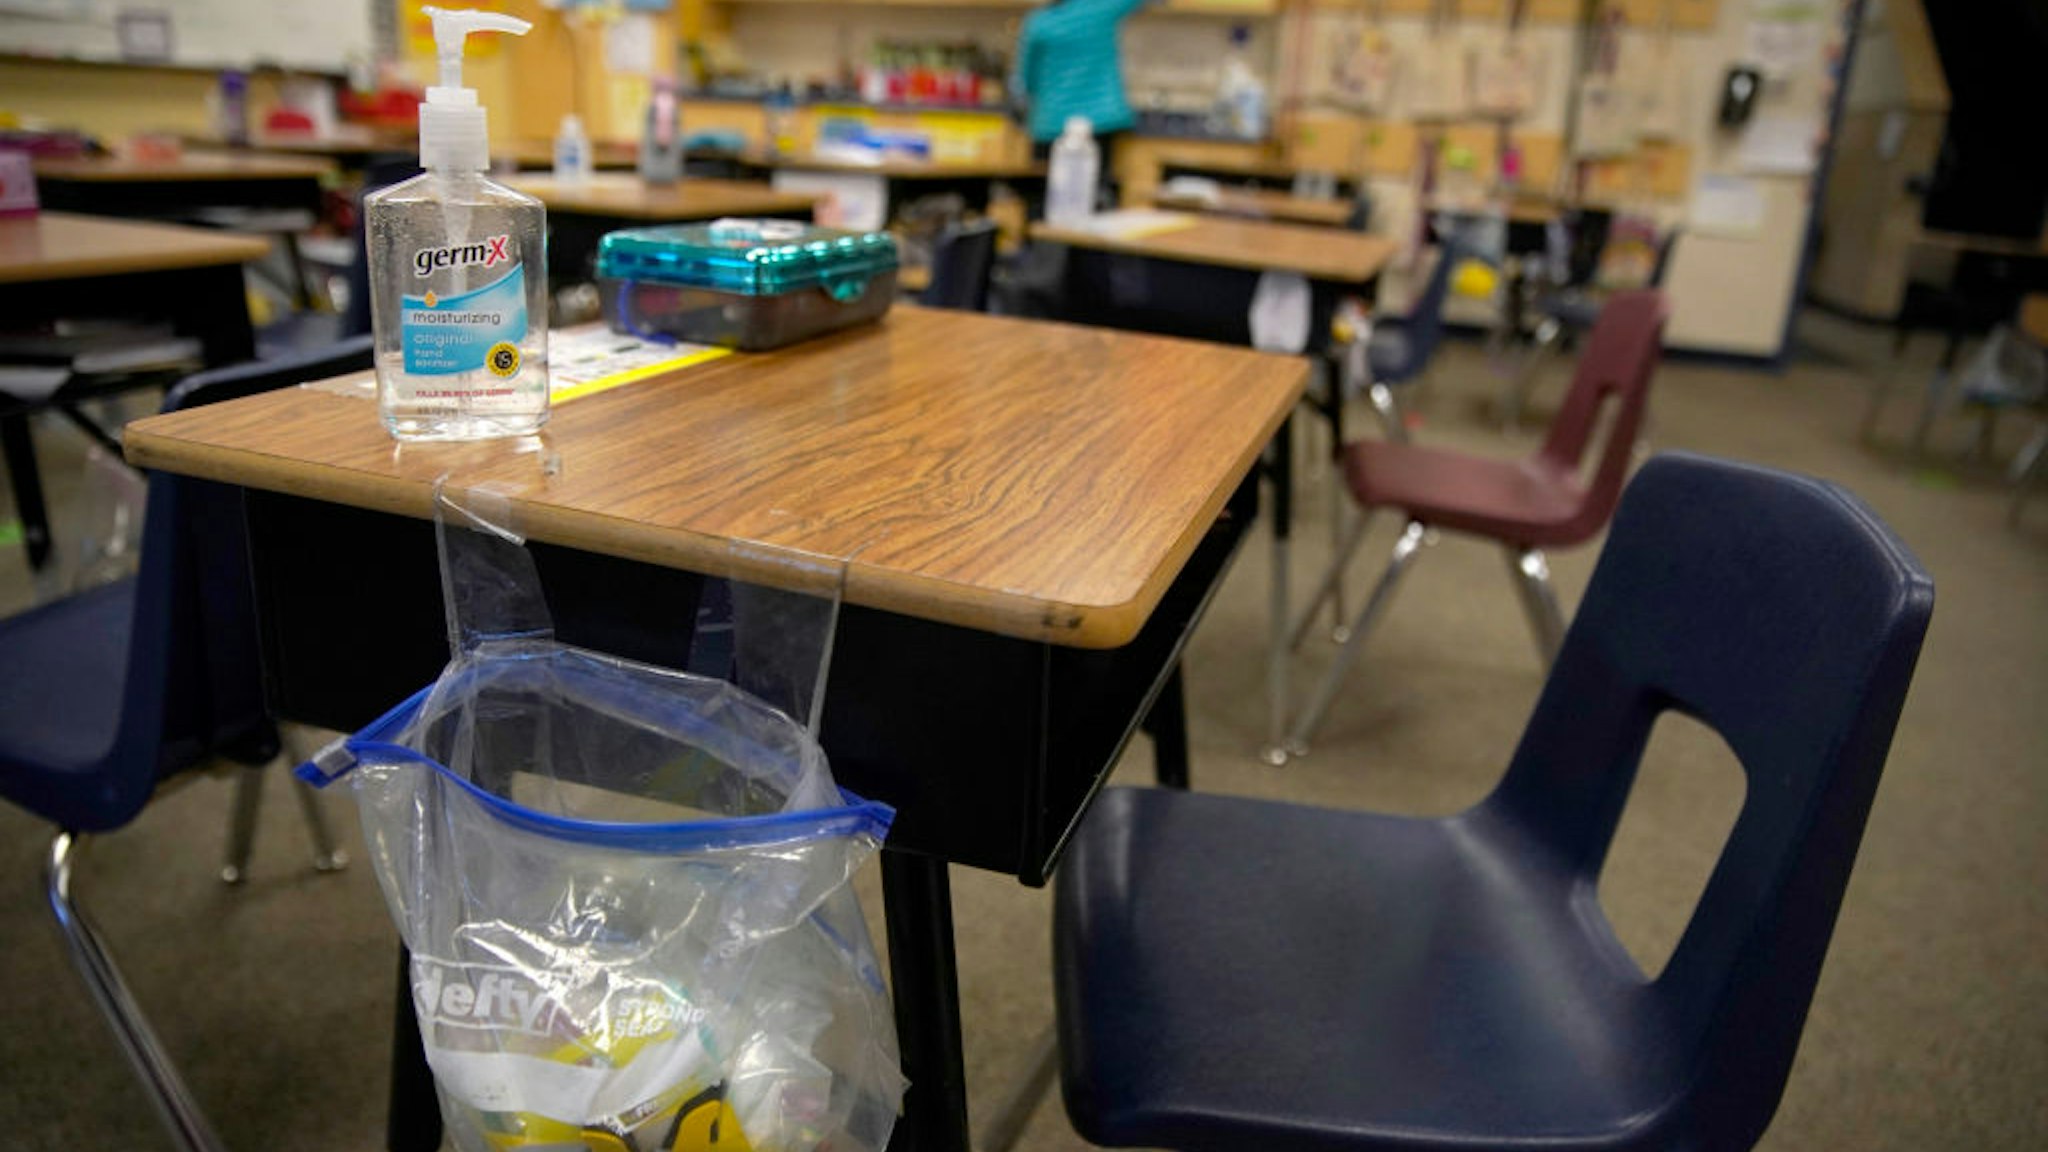 A teacher prepares her classroom before students arrive for school at Freedom Preparatory Academy on February 10, 2021 in Provo, Utah. Freedom Academy has done in person instruction since the middle of August of 2020 with only four days of school canceled due to COVID-19 outbreak.